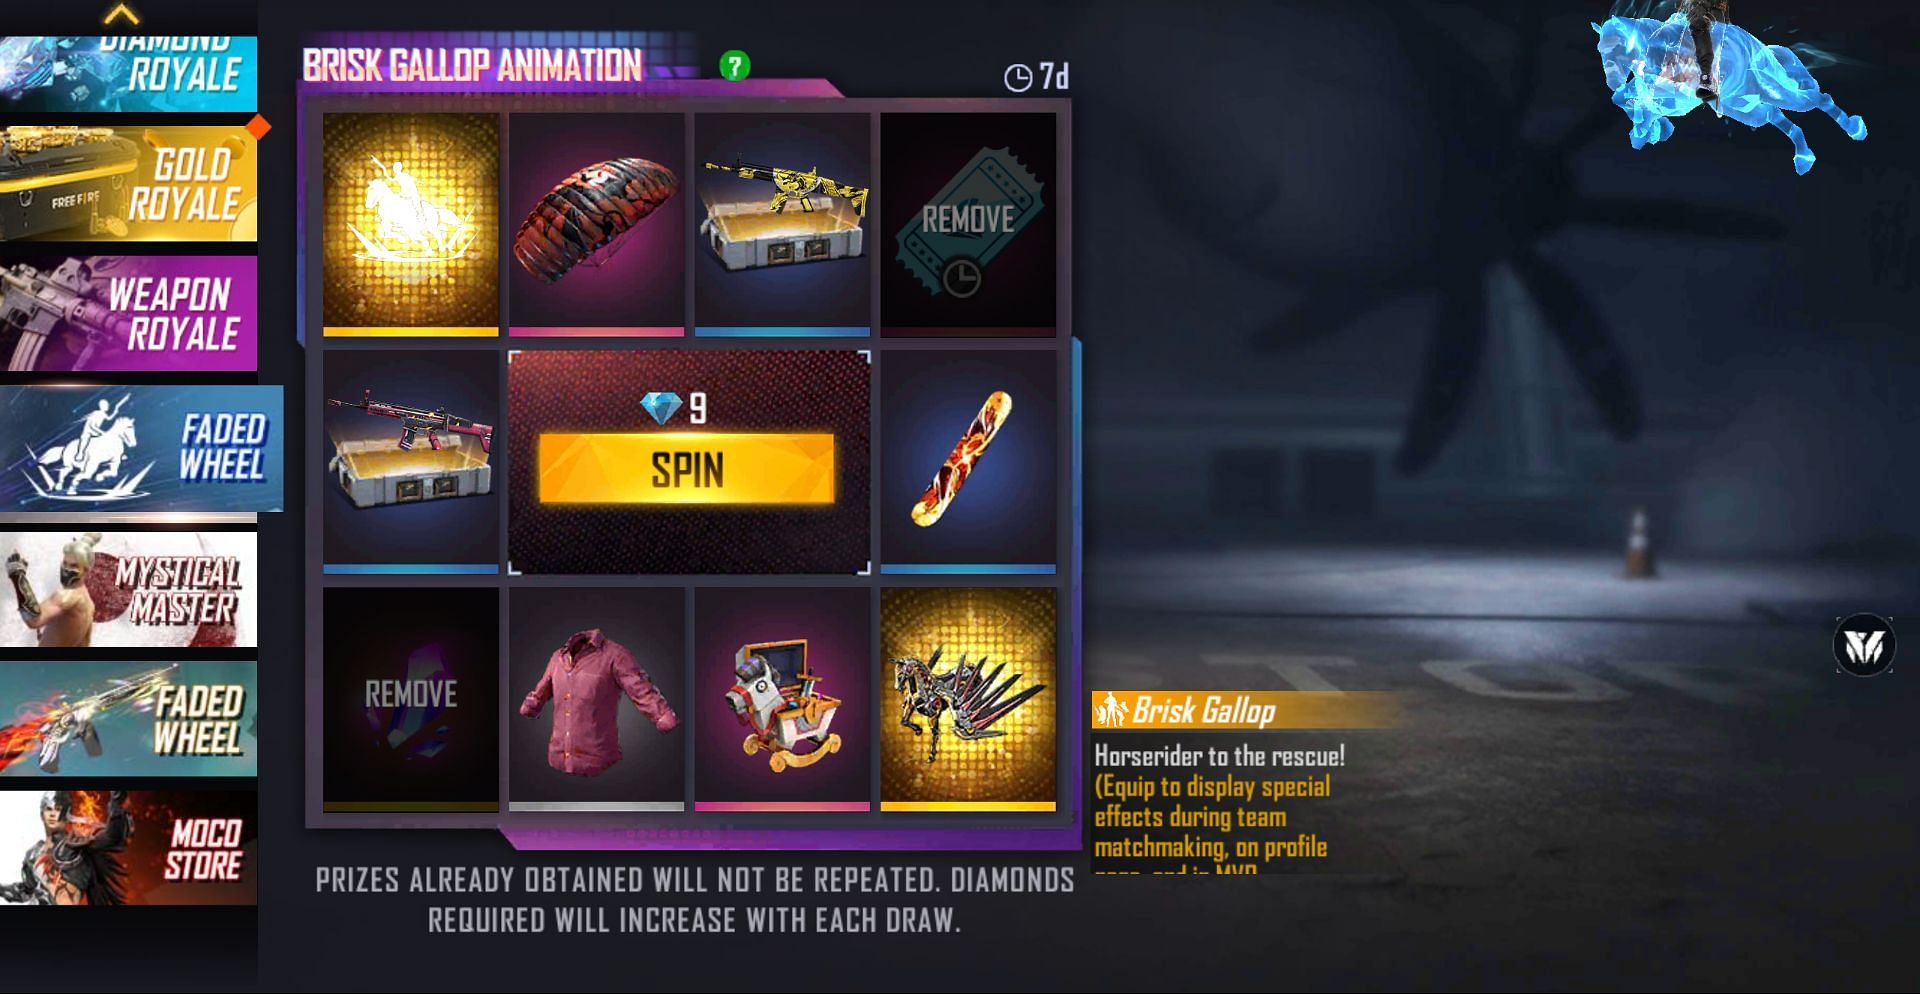 After removing two items, users can make spins (Image via Garena)